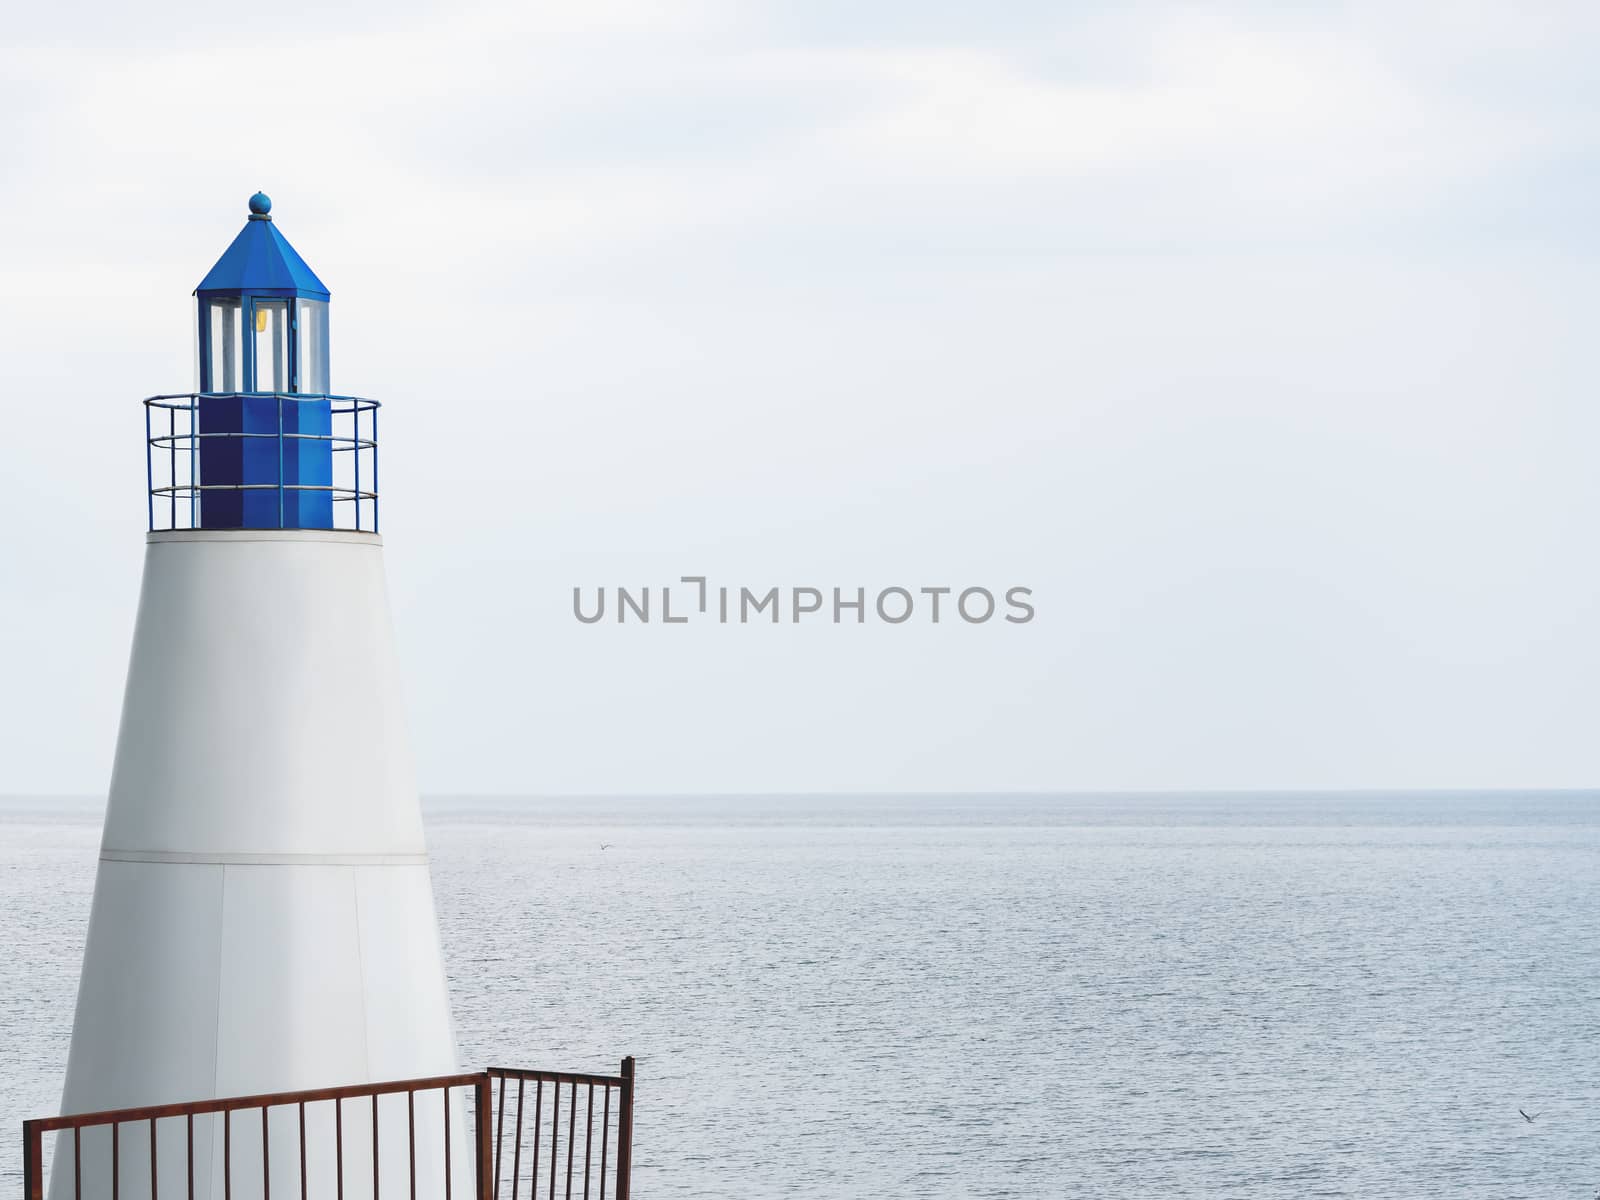 White lighthouse with blue tower on grey tranquil sea background. Natural background with copy space.